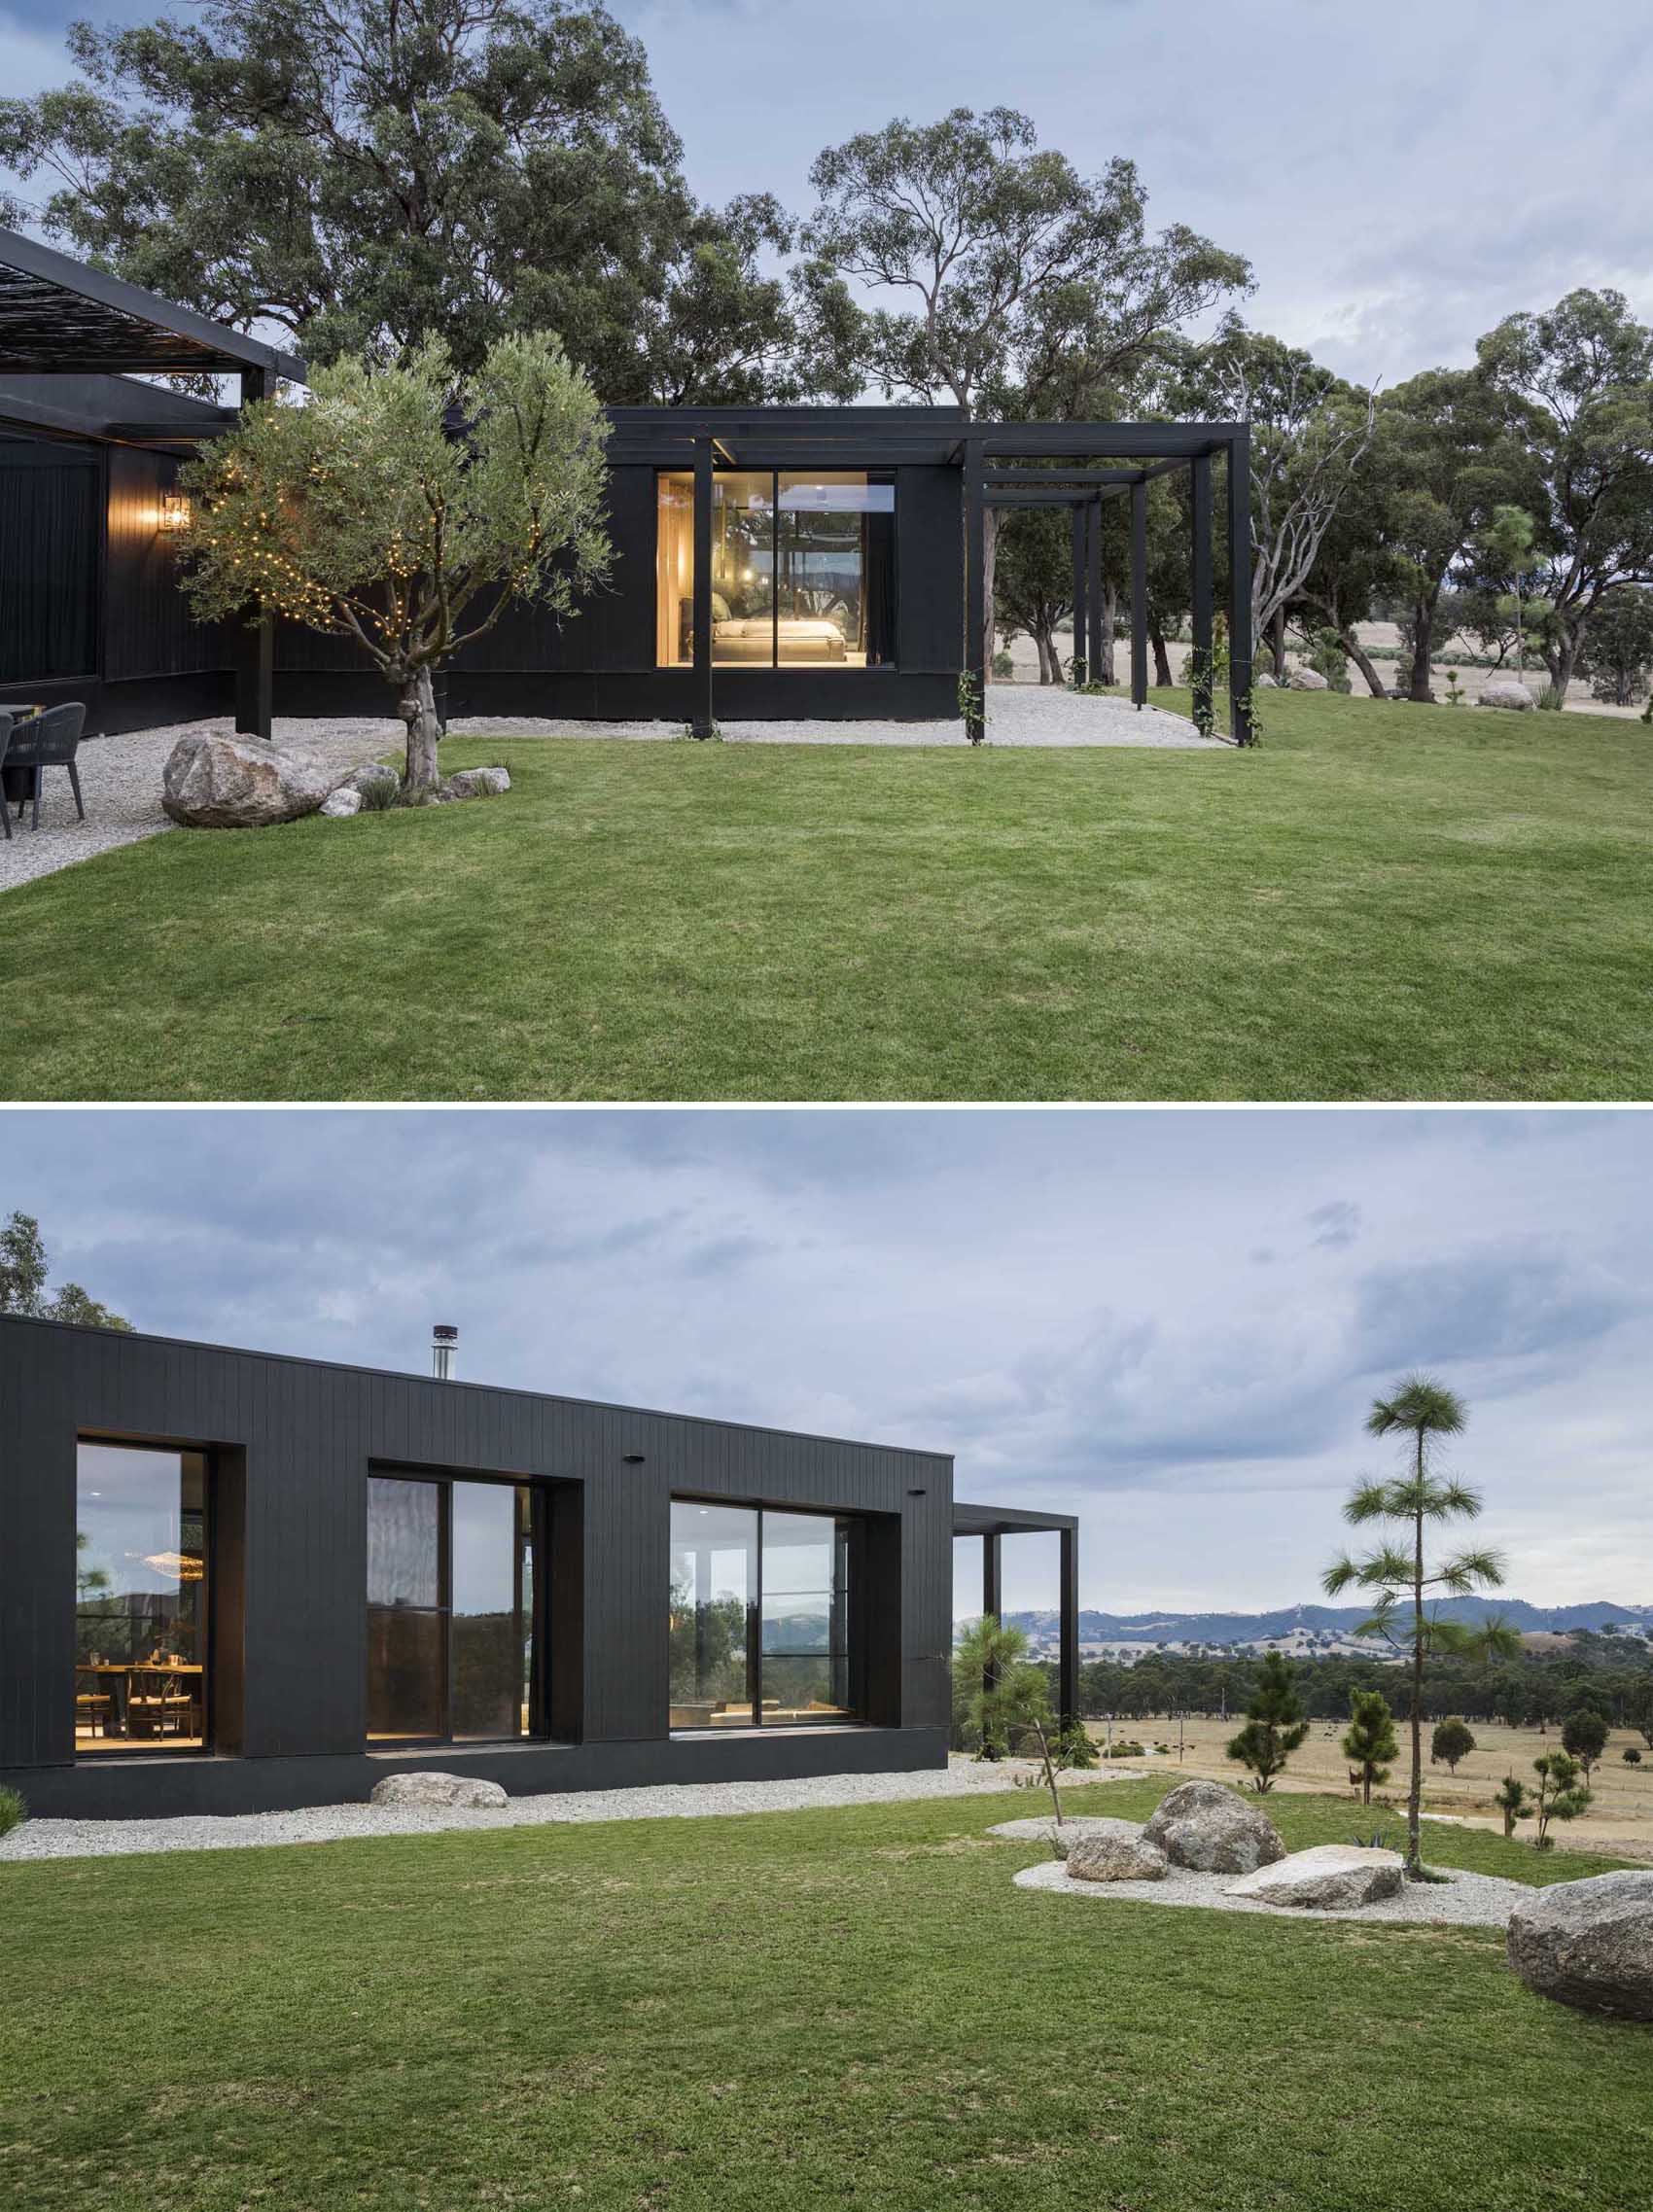 A modern home in a U-shape, includes a black exterior and warm wood accents.